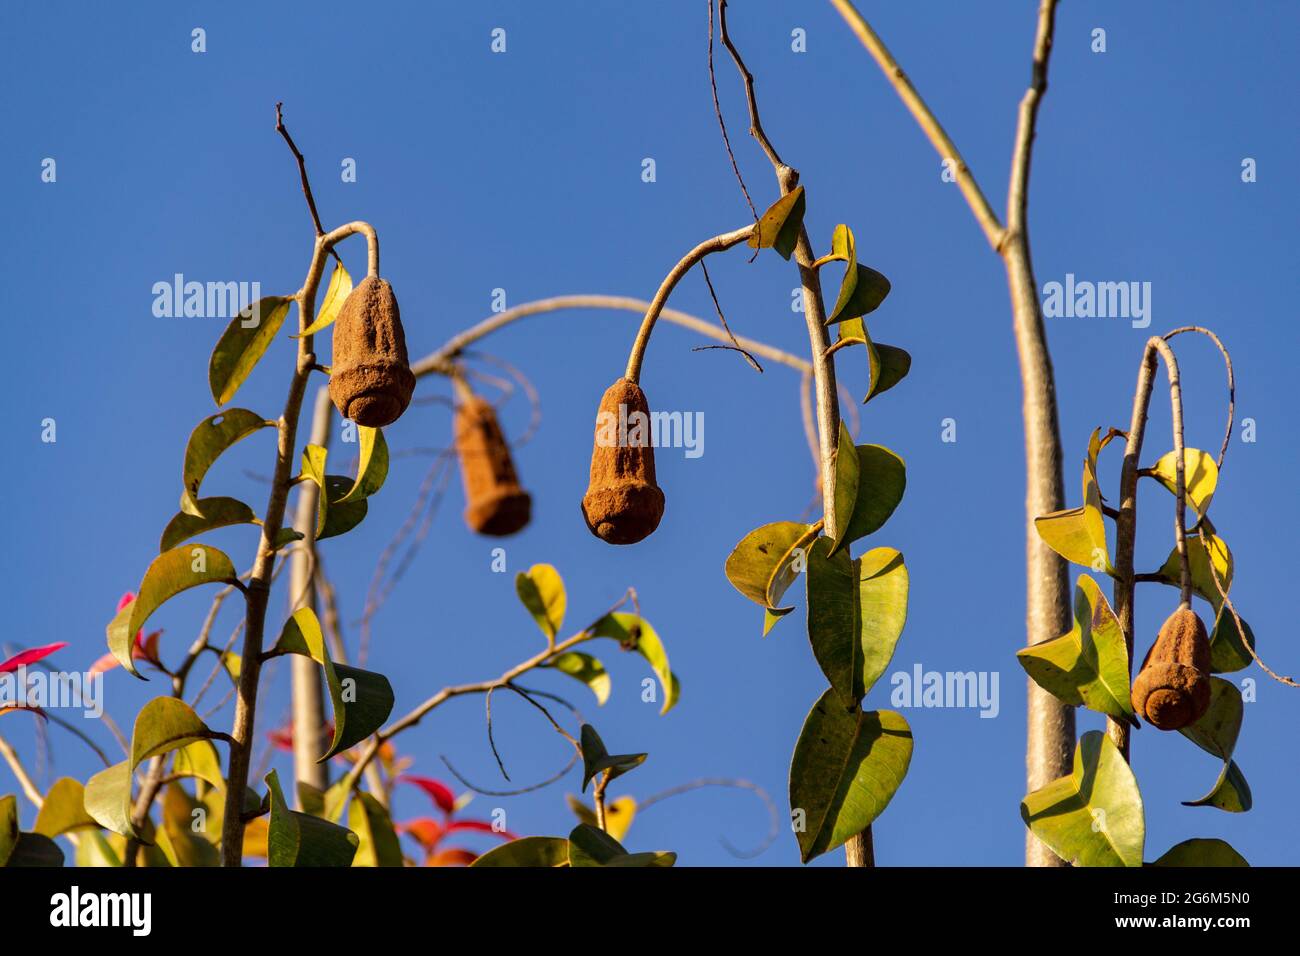 Detail of a pink jequitibá (Cariniana legalis) with fruits hanging from the branches and the blue sky in the background. Stock Photo